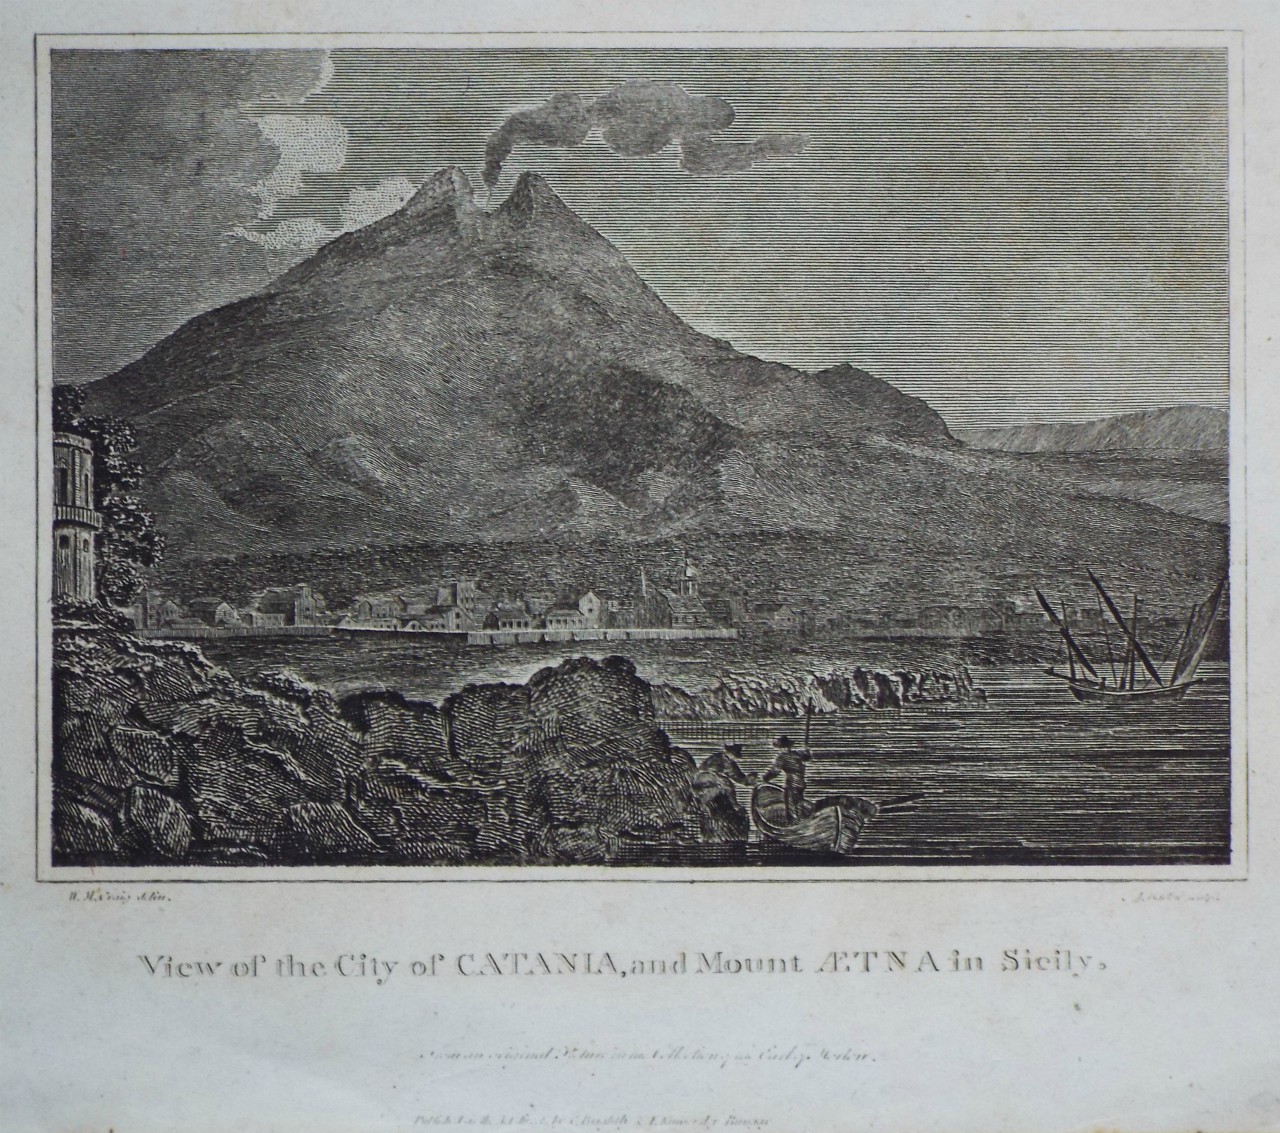 Print - View of the City of Catania, and Mount Aetna in Sicily. - Barlow